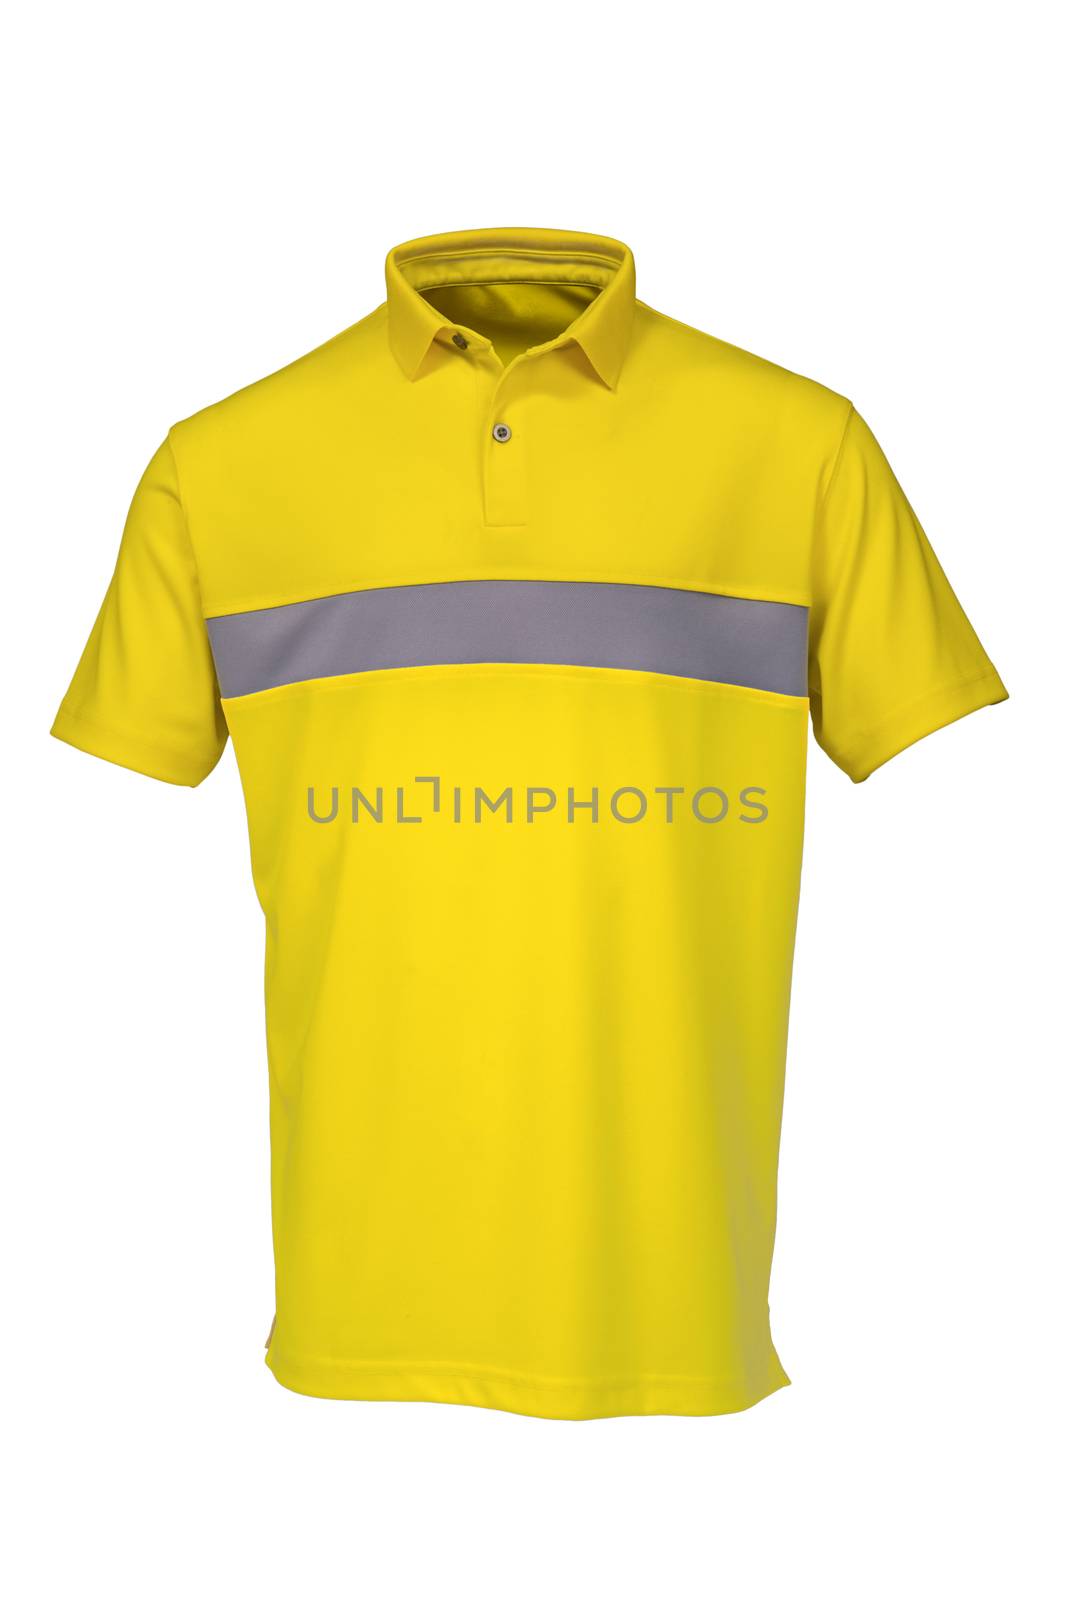 Yellow golf tee shirt for man or woman on white background